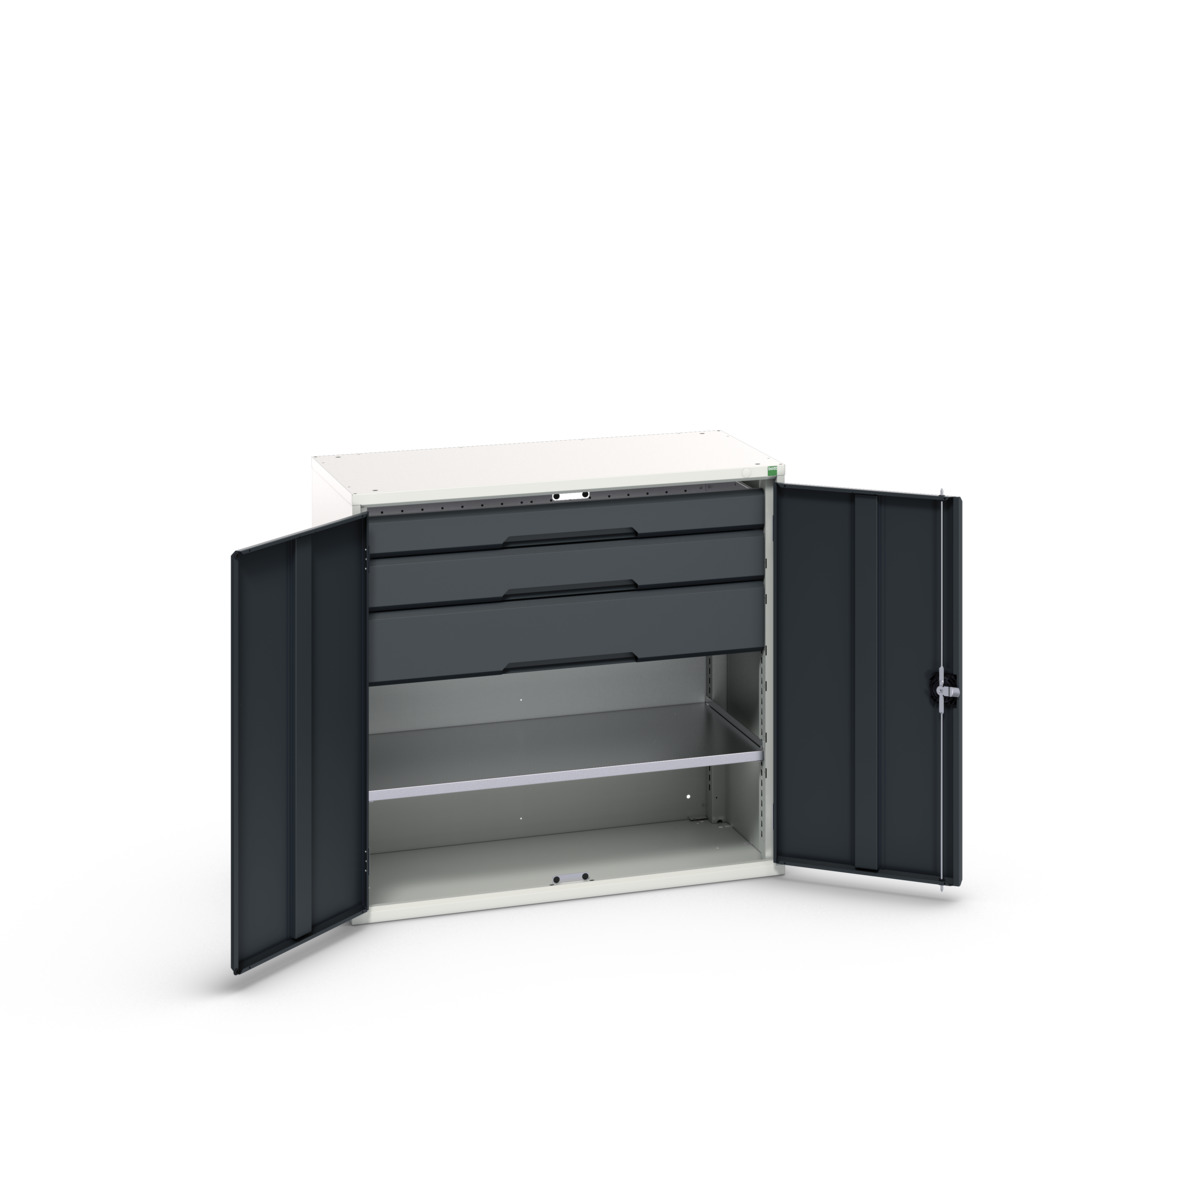 16926554.19 - verso kitted cupboard